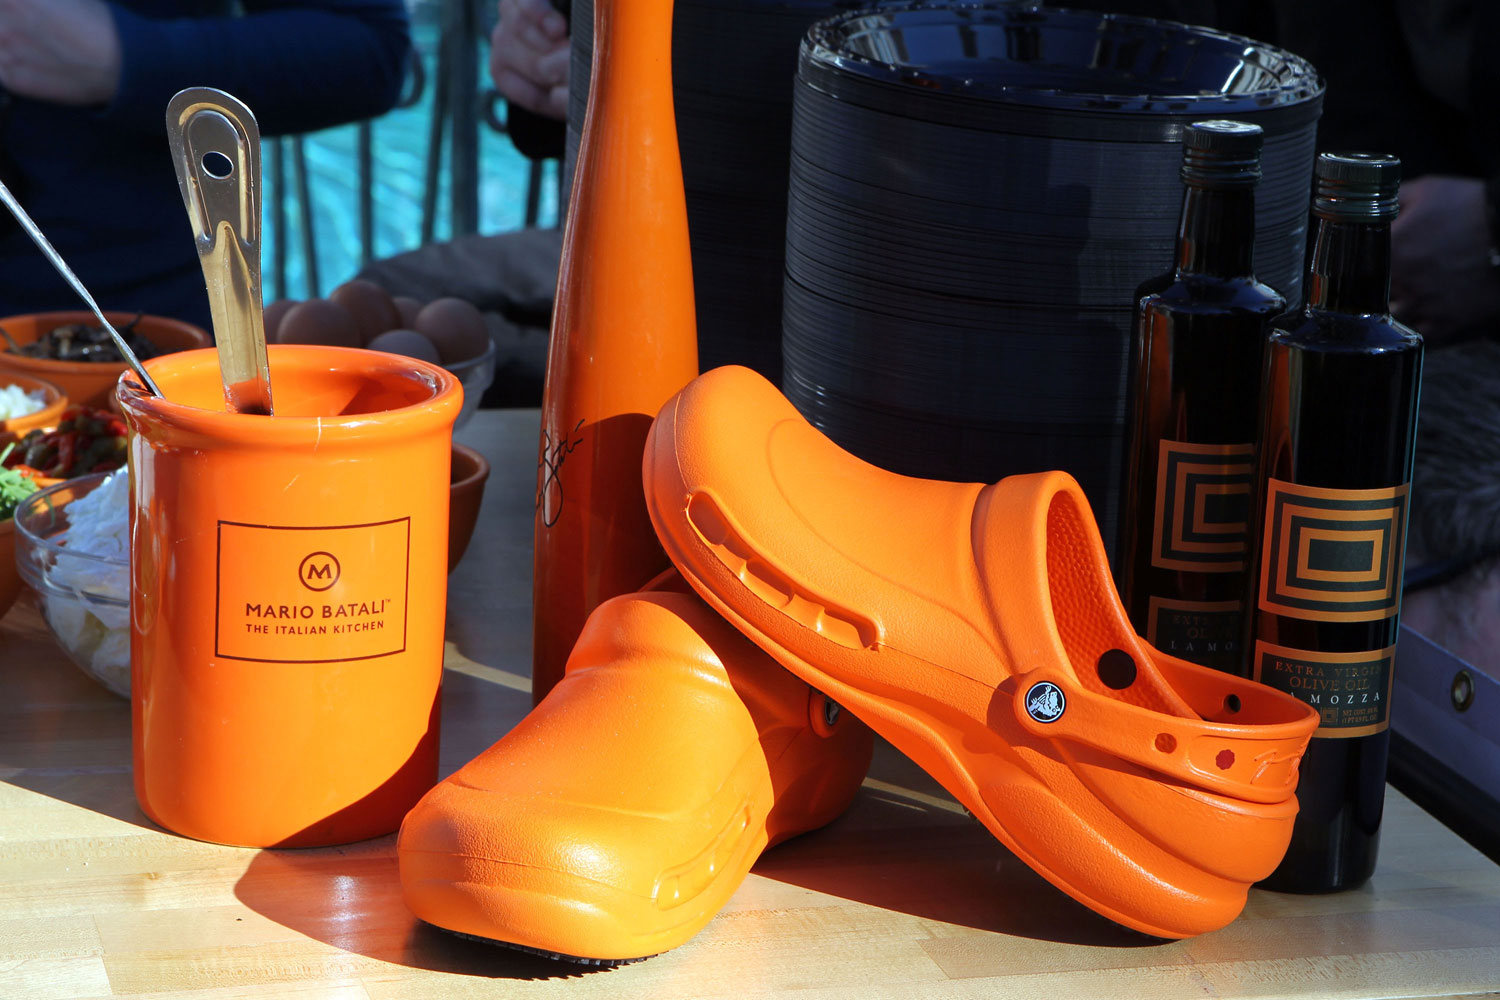 Chef Mario Batali's signature cookware and Crocs shoes are presented on the prep table during a cooking demonstration at the "Winter In Venice" at The Venetian on November 25, 2011 in Las Vegas, Nevada.